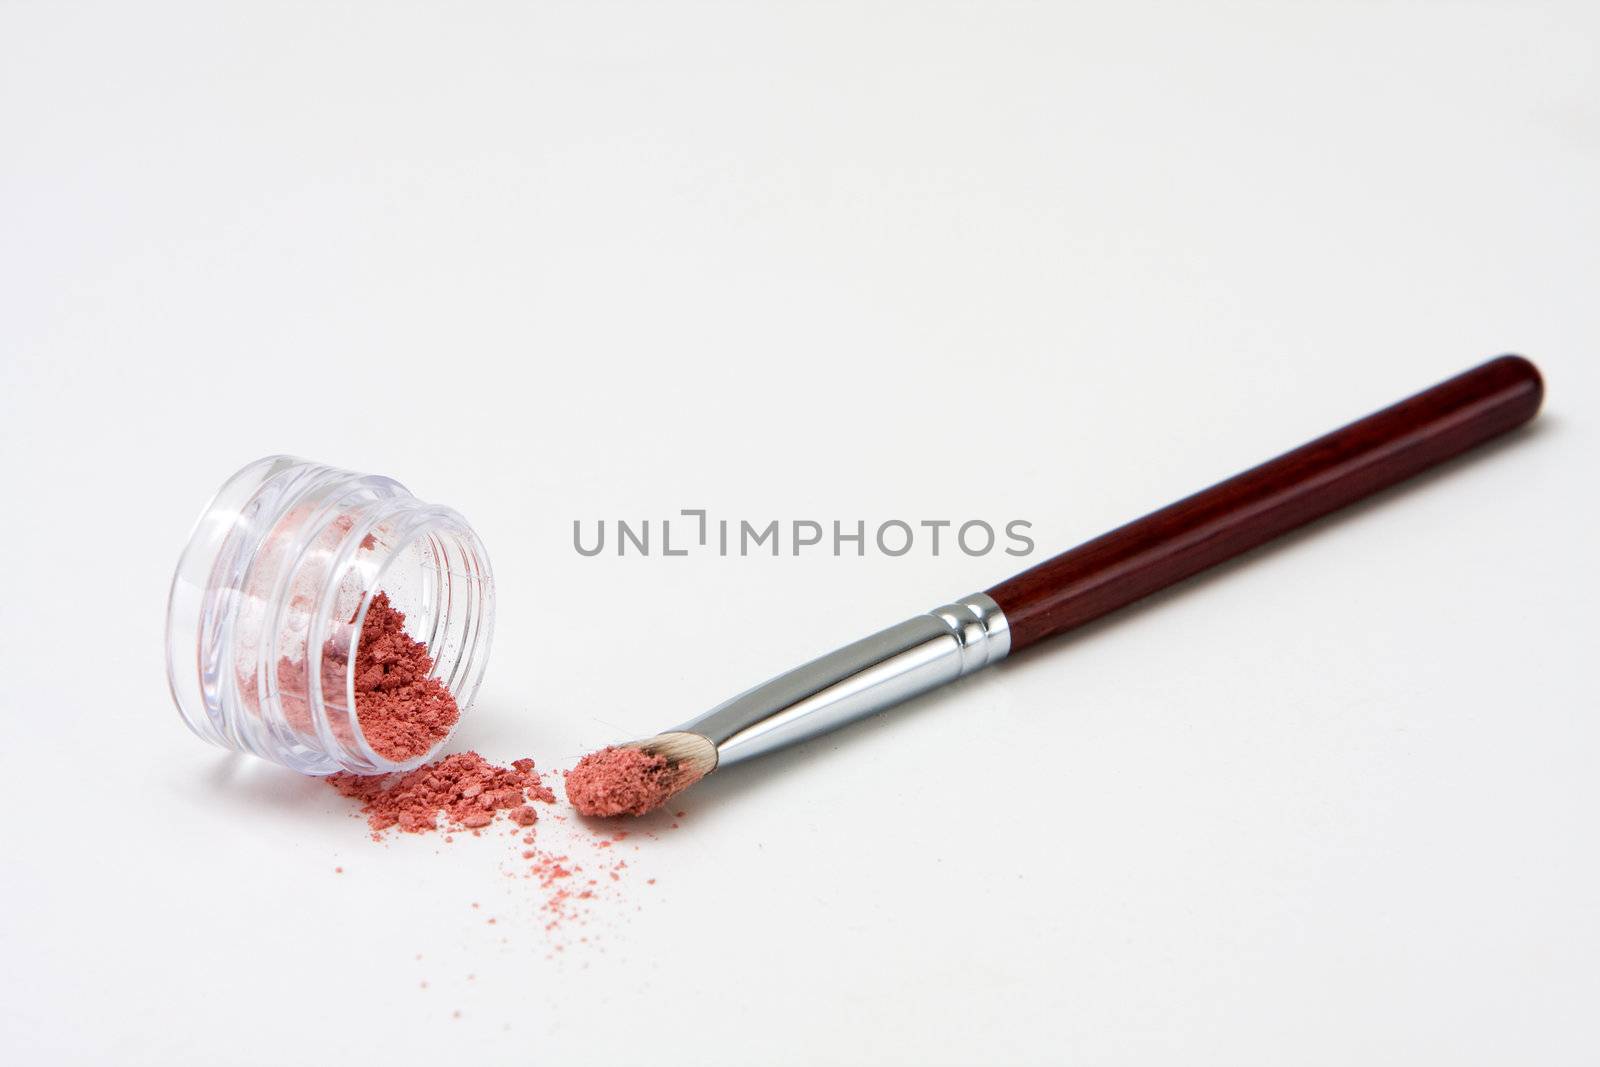 Translucent pink powder in a jar and on brush, isolated